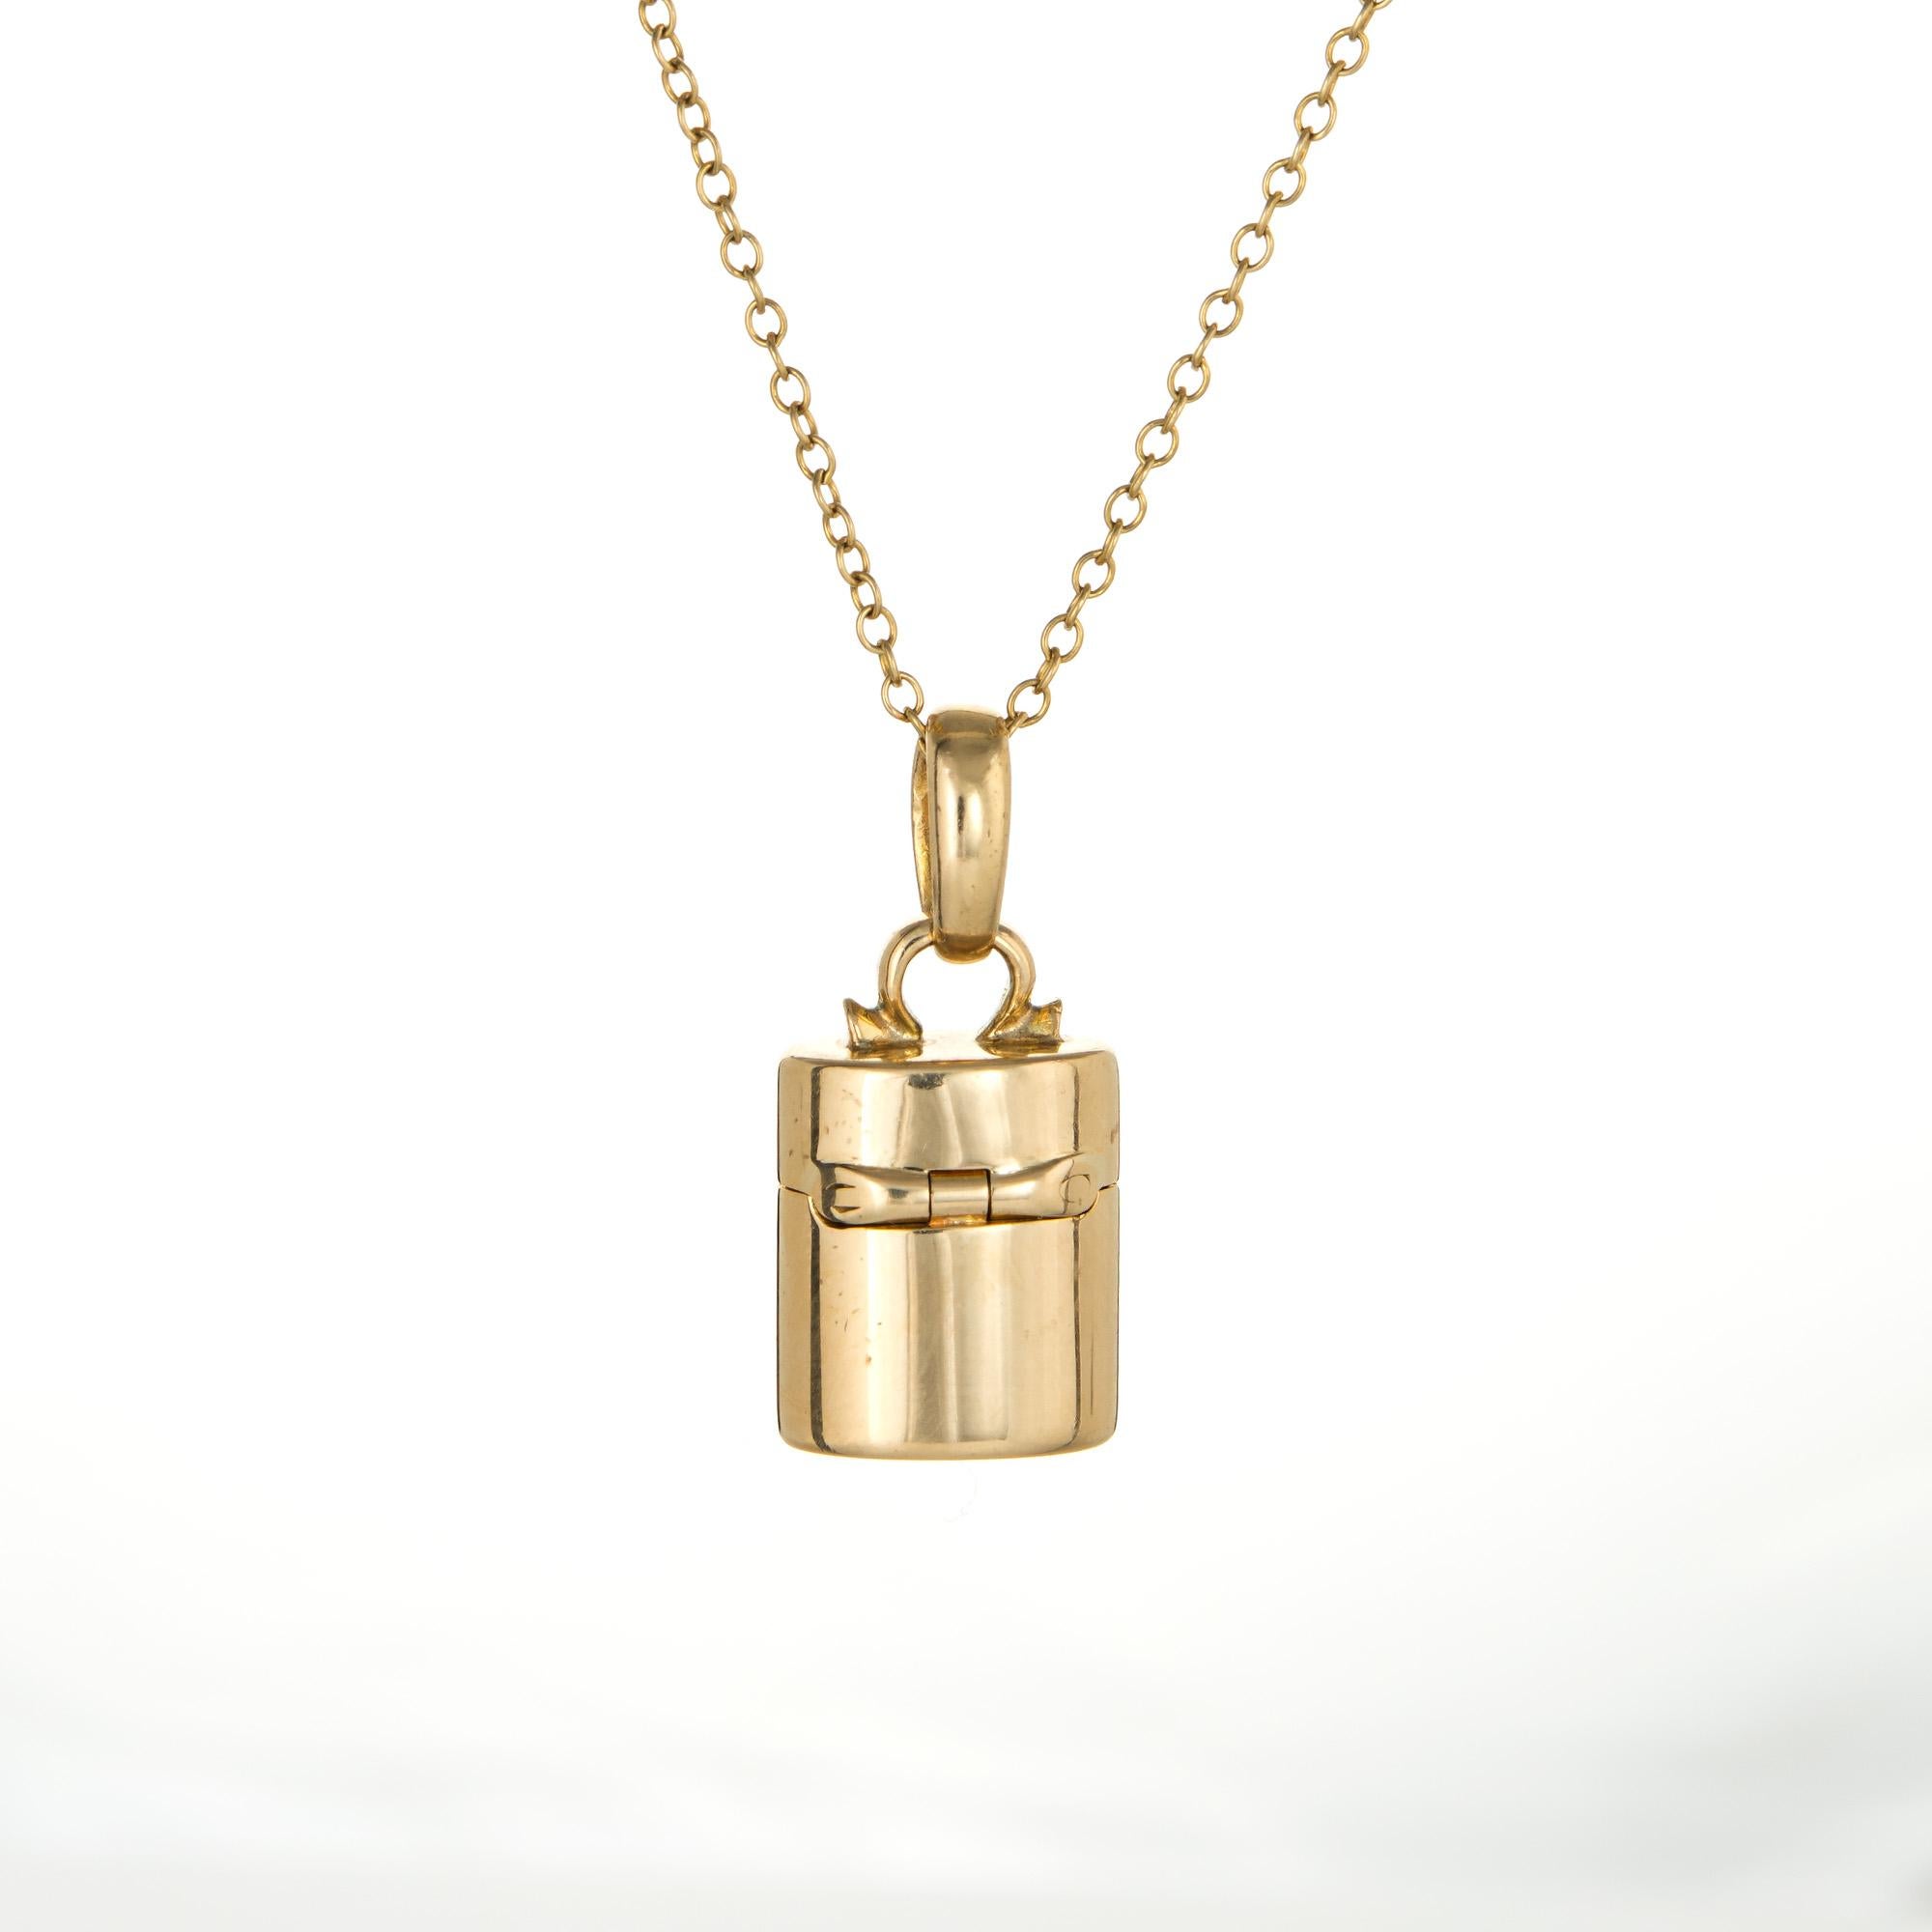 Elegant and finely detailed vintage Tiffany & Co pillbox pendant & necklace crafted in 18 karat yellow gold.  

Sapphire cabochon is estimated at 0.10 carats (in excellent condition and free of cracks of chips).  

The pendant is a retired piece and